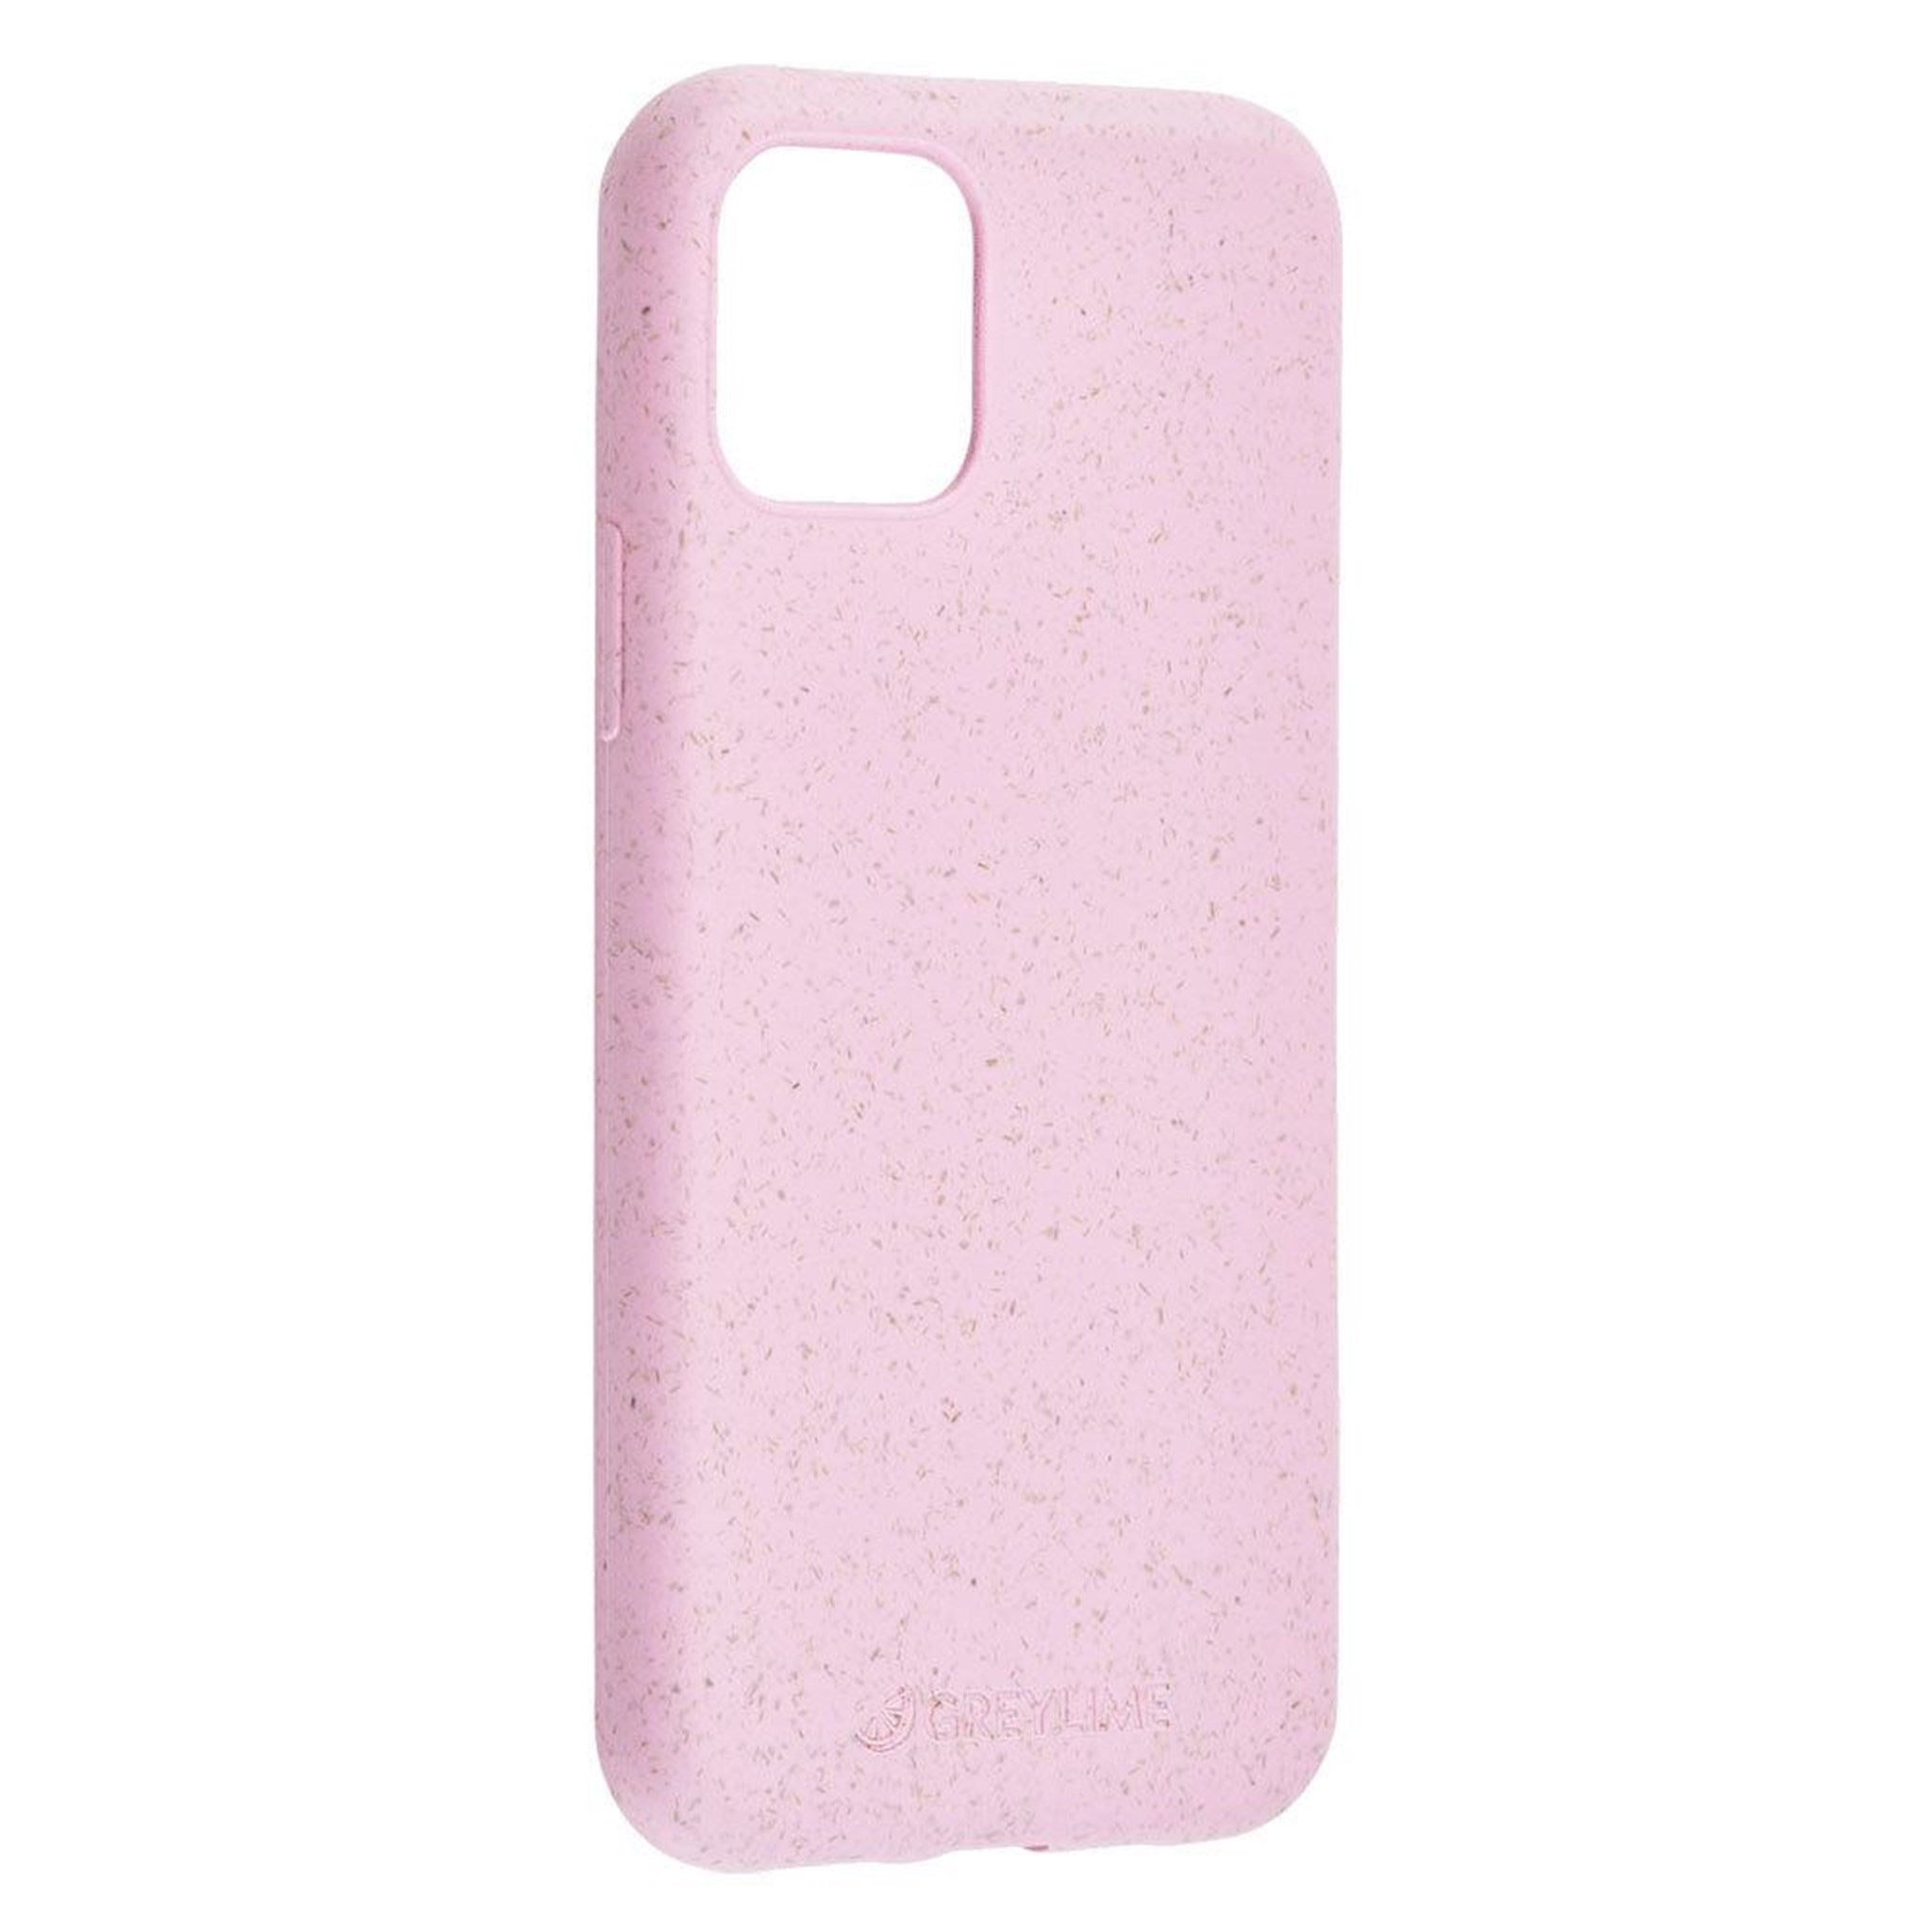 GreyLime-iPhone-11-Pro-biodegradable-cover-Pink-COIP11P05-V1.jpg